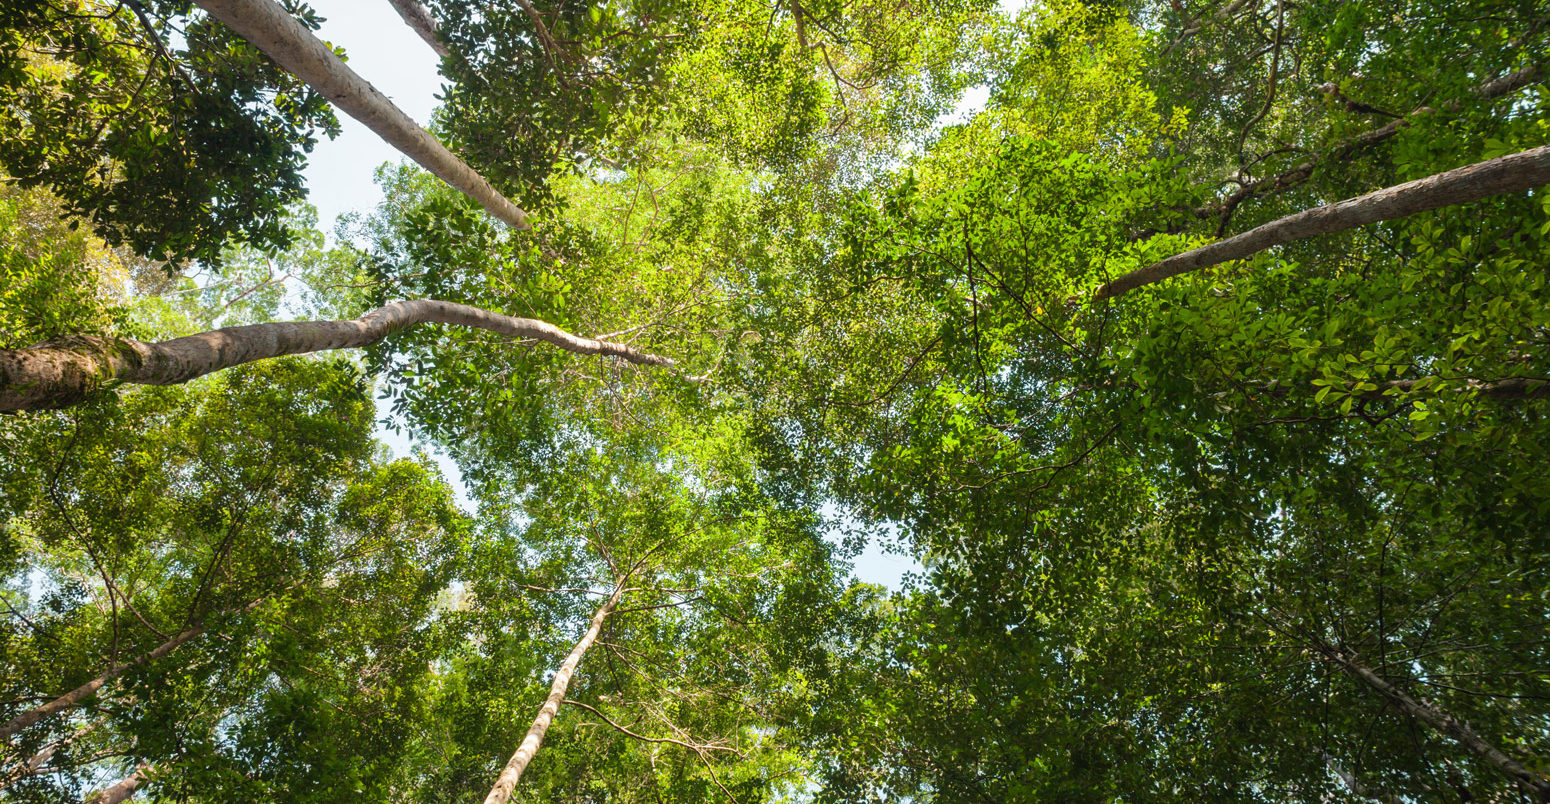 View of the rainforest canopy looking directly upwards, Borneo. Credit: Peter Lopeman / Alamy Stock Photo